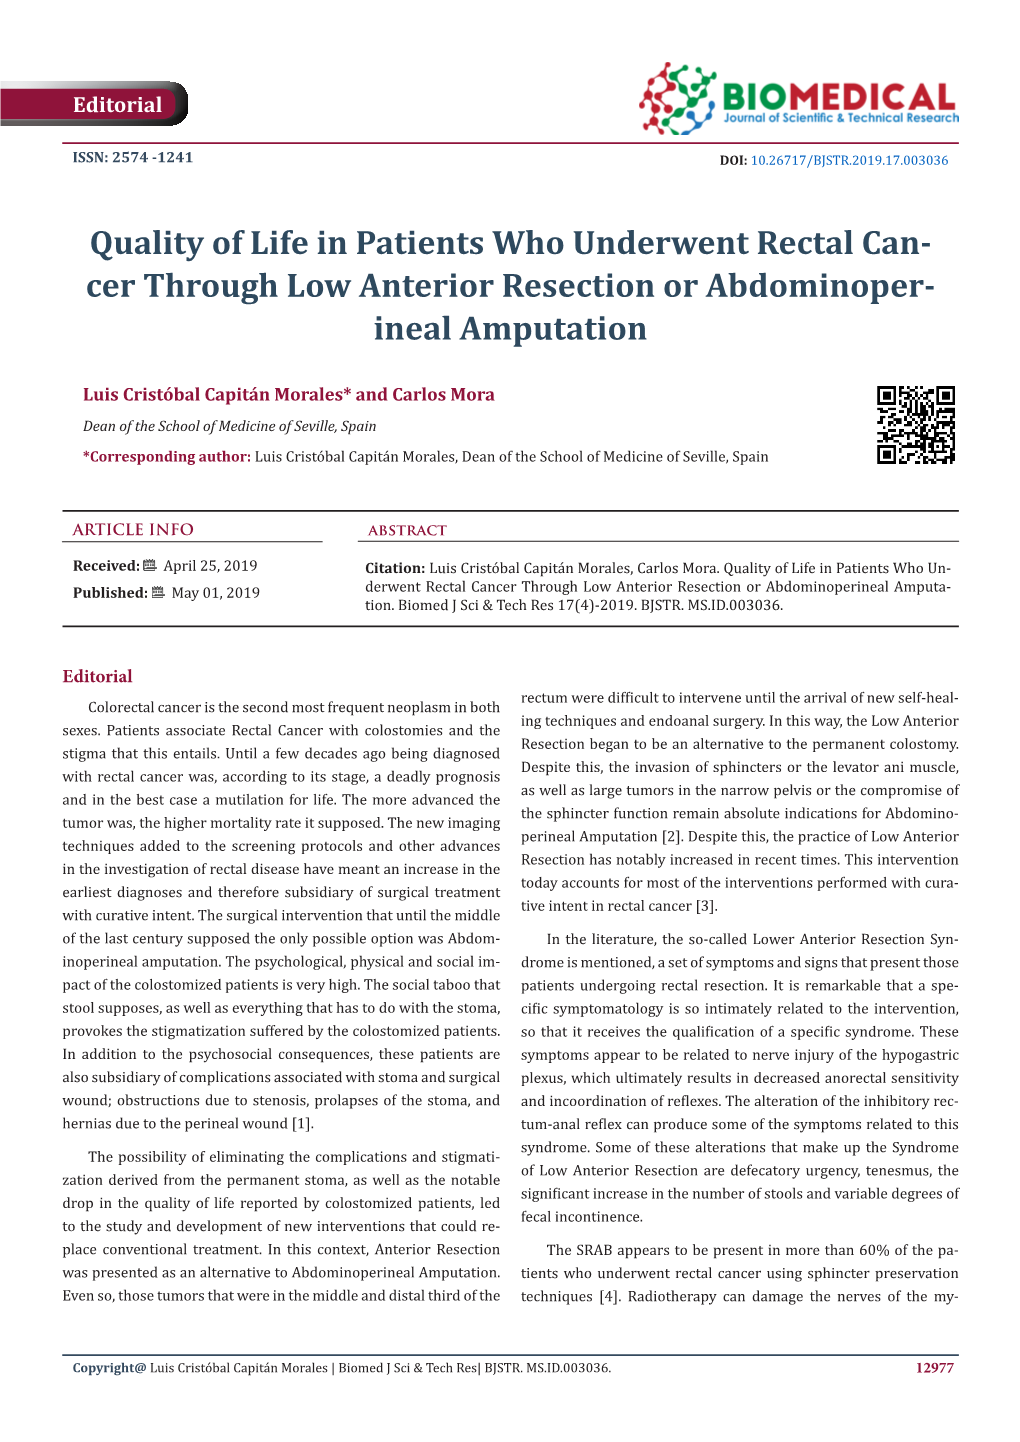 Quality of Life in Patients Who Underwent Rectal Cancer Through